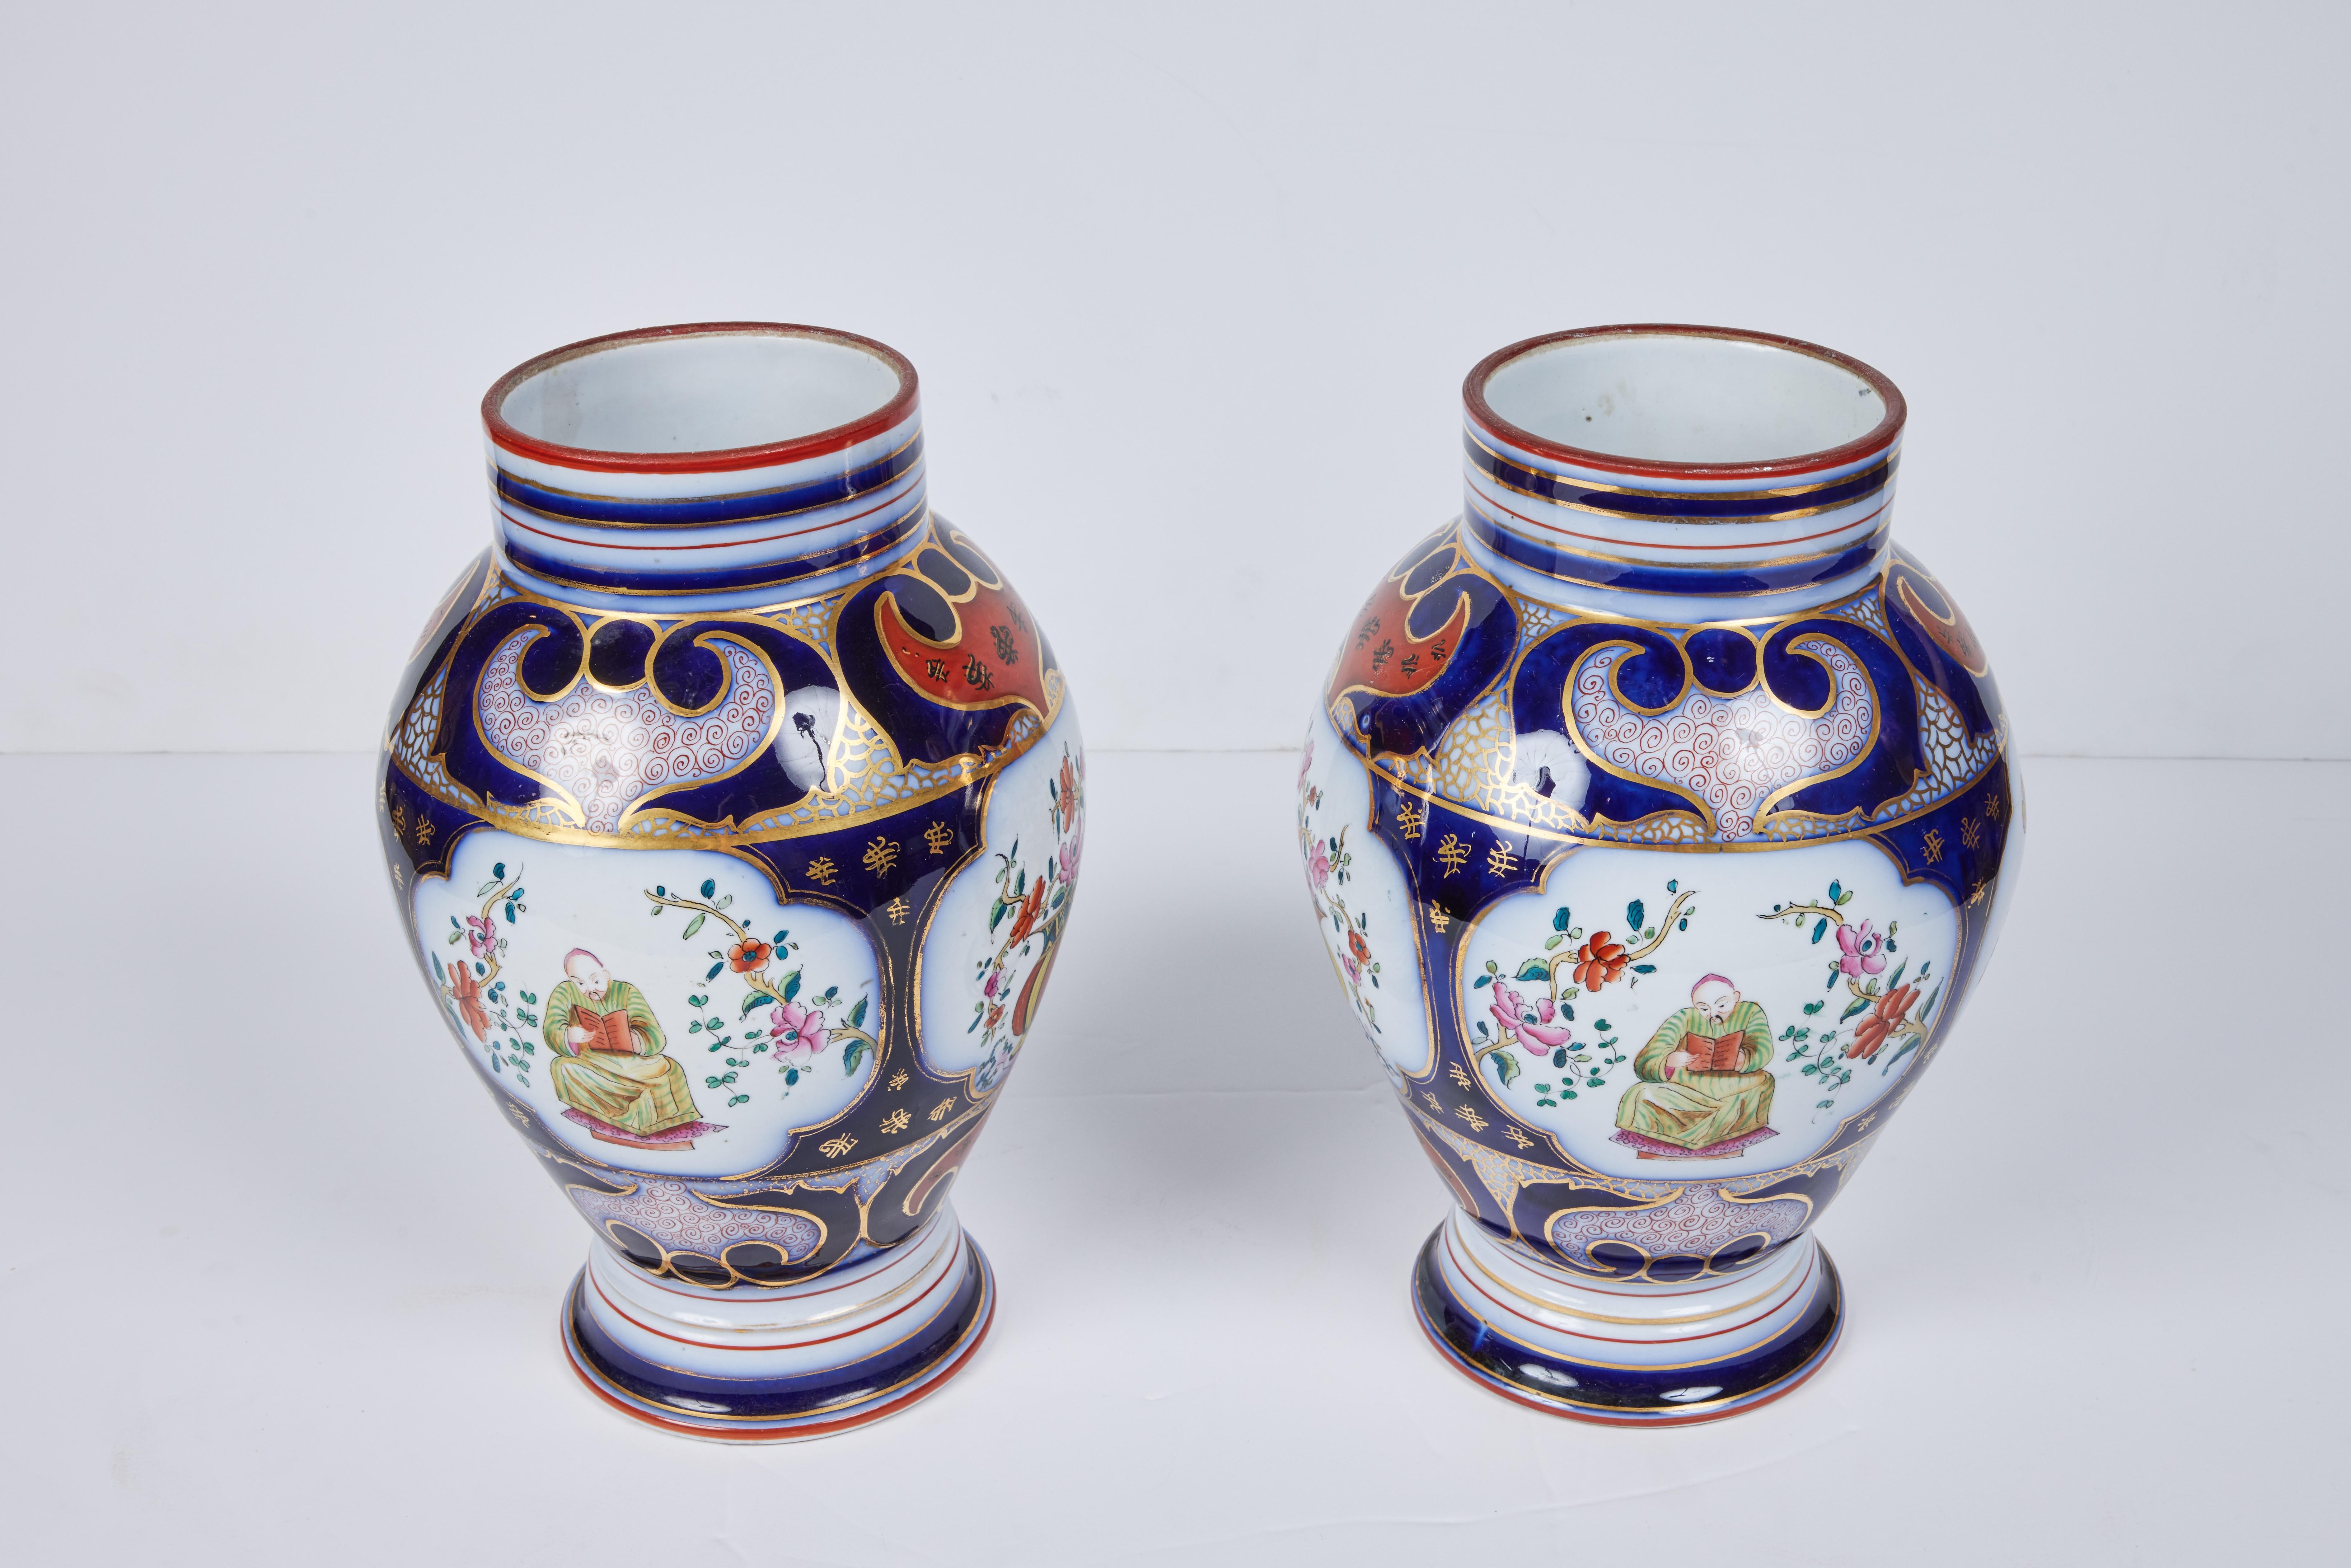 A beautiful pair of porcelain vases with a hand painted and gilded glazed overlay.